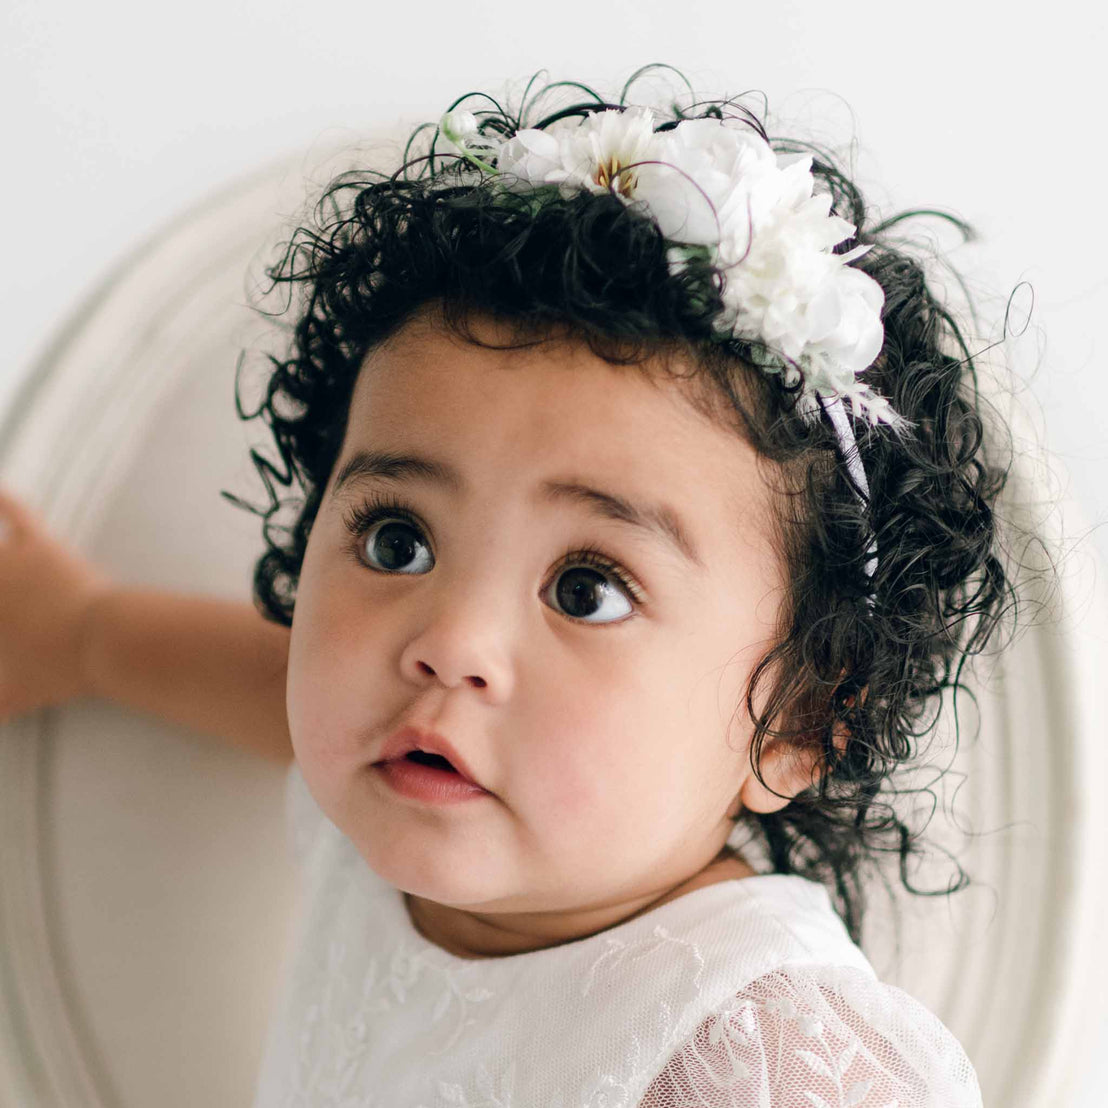 A toddler with curly hair wearing an Ella Flower Headband adorned with white flowers and greenery looks up with wide eyes. The child is dressed in a white garment, holding onto the back of a chair. The background is soft and out of focus, adding to the scene's baby comfort.